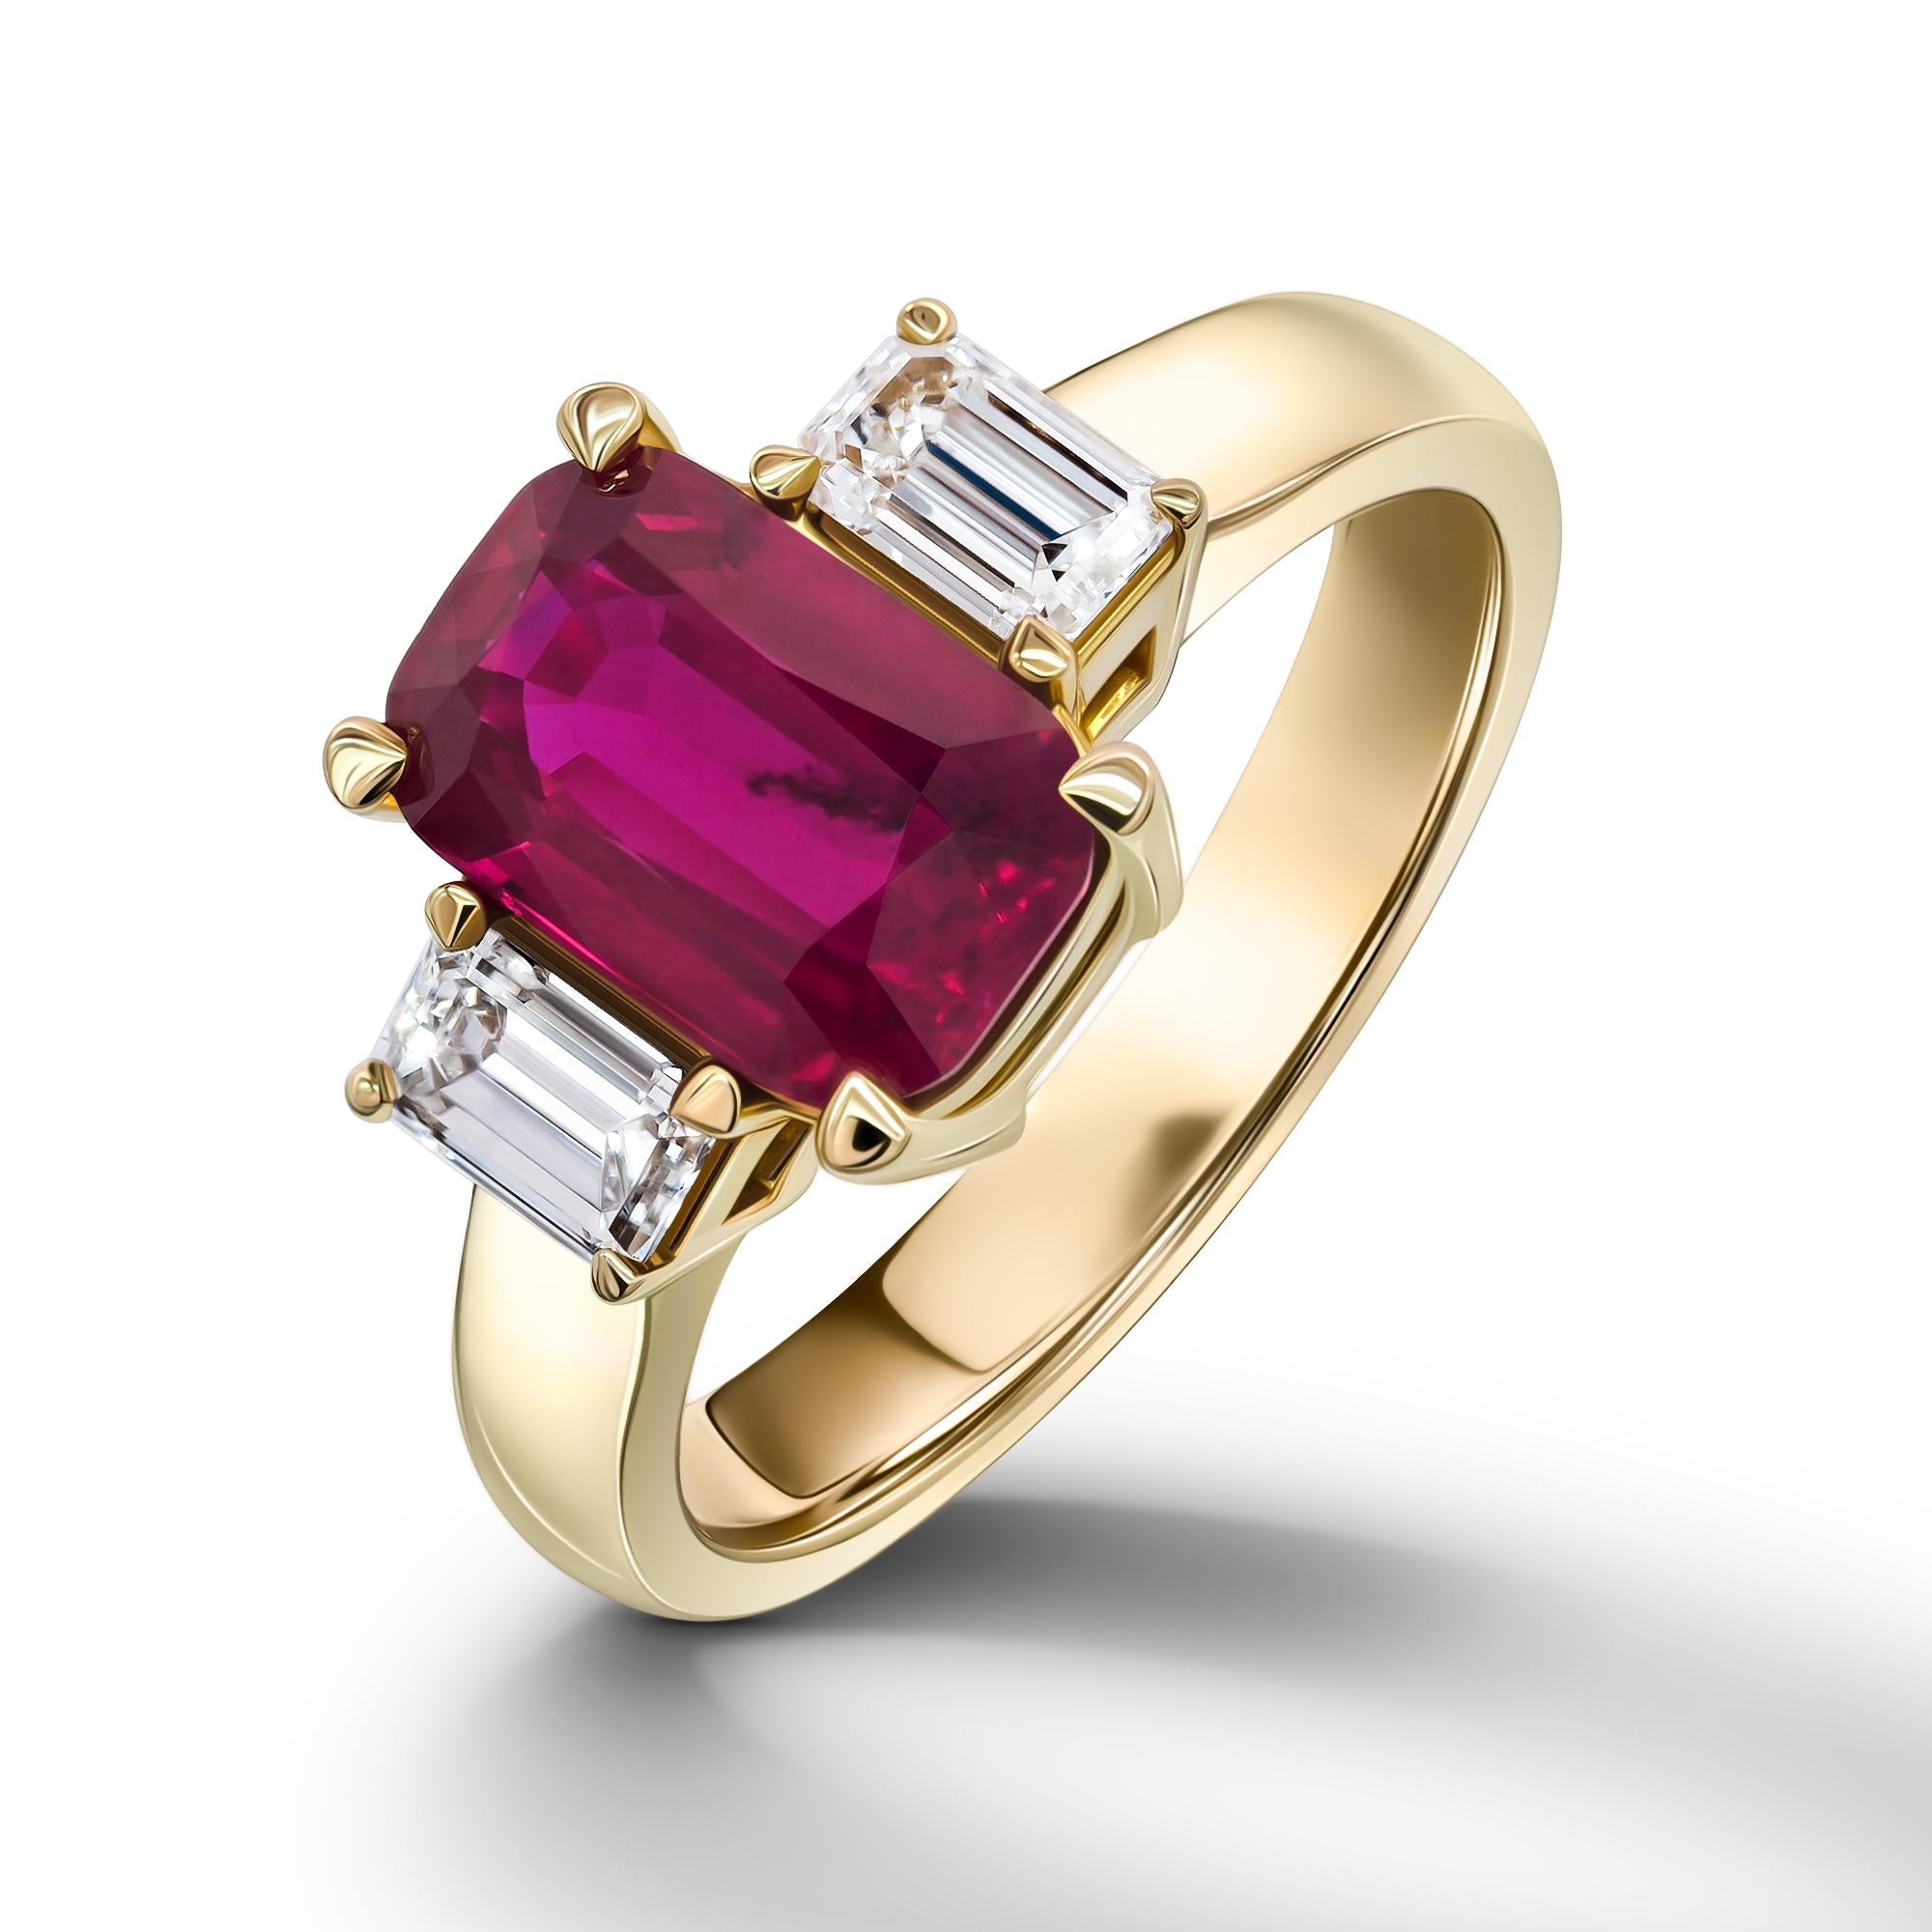 •	18k yellow gold Unheated red Ruby in cushion cut total carat weight 2.52. 
•	Unheated ruby in cushion, total carat weight 2.51 – GRS certified. 
•	Diamonds, 2 pc emerald cut diamonds – total carat weight 0.56.  
•	Ring size – 6.5’.
•	Product